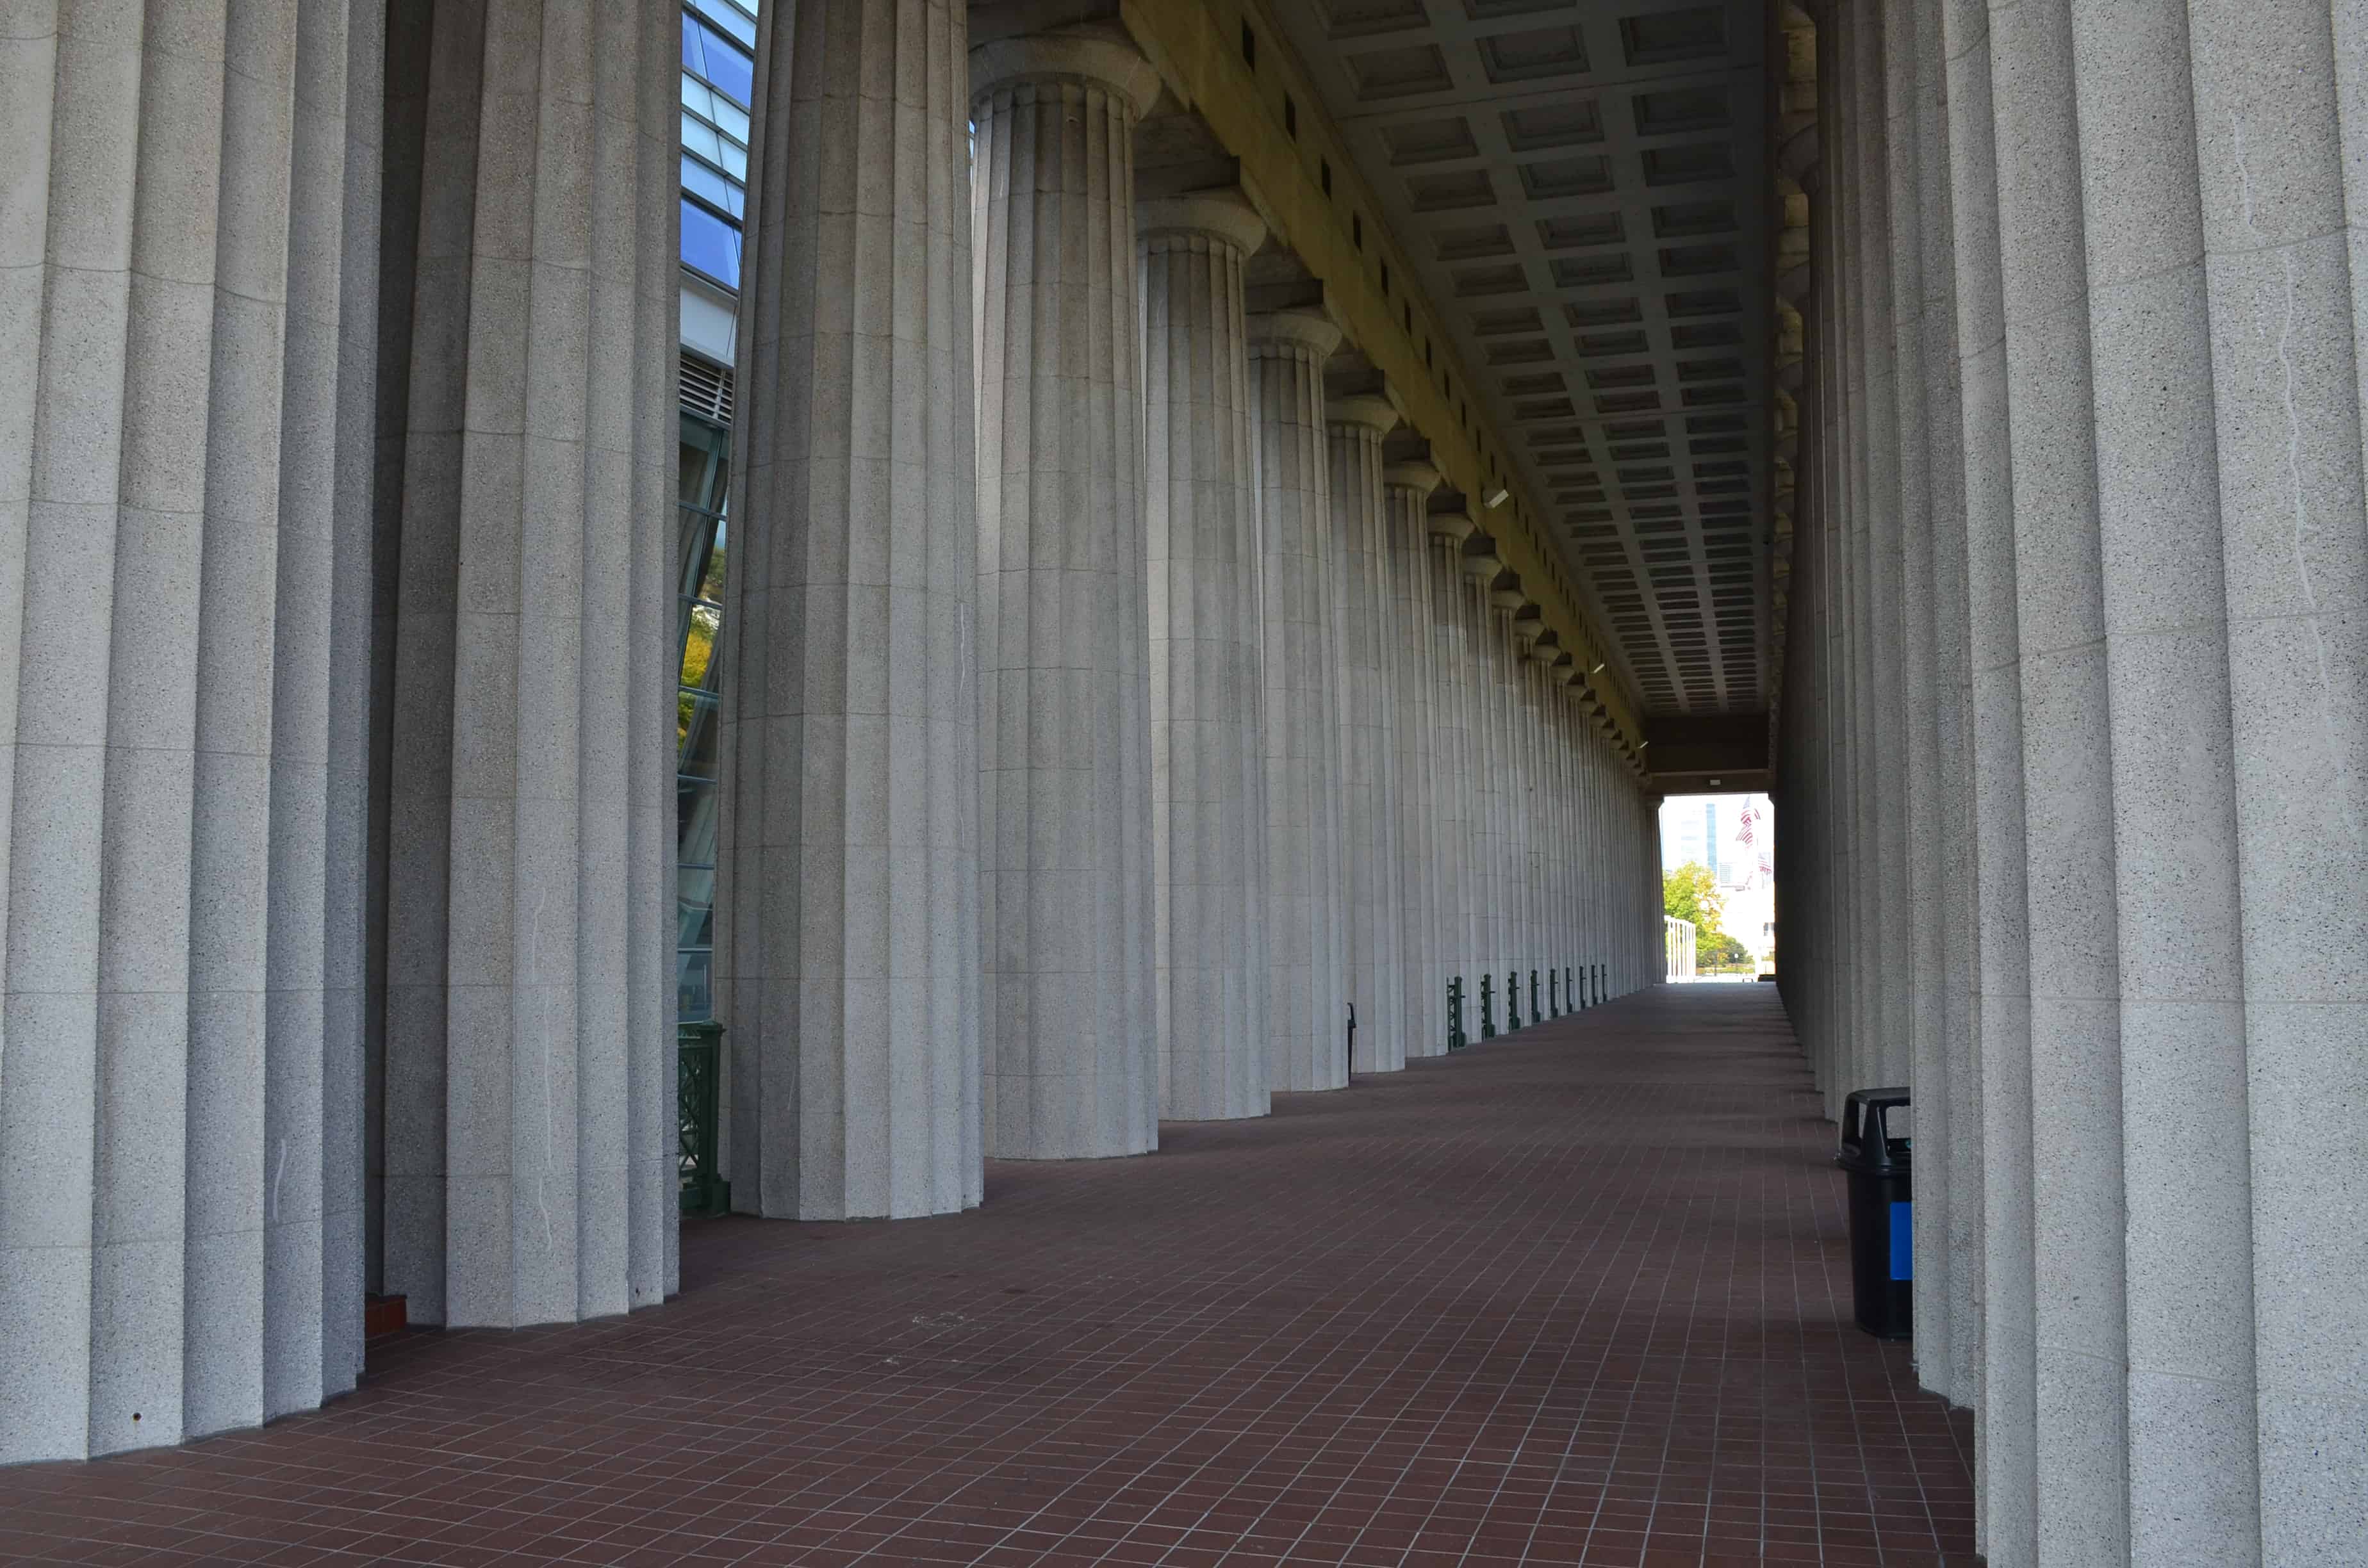 Colonnade at Soldier Field in Chicago, Illinois